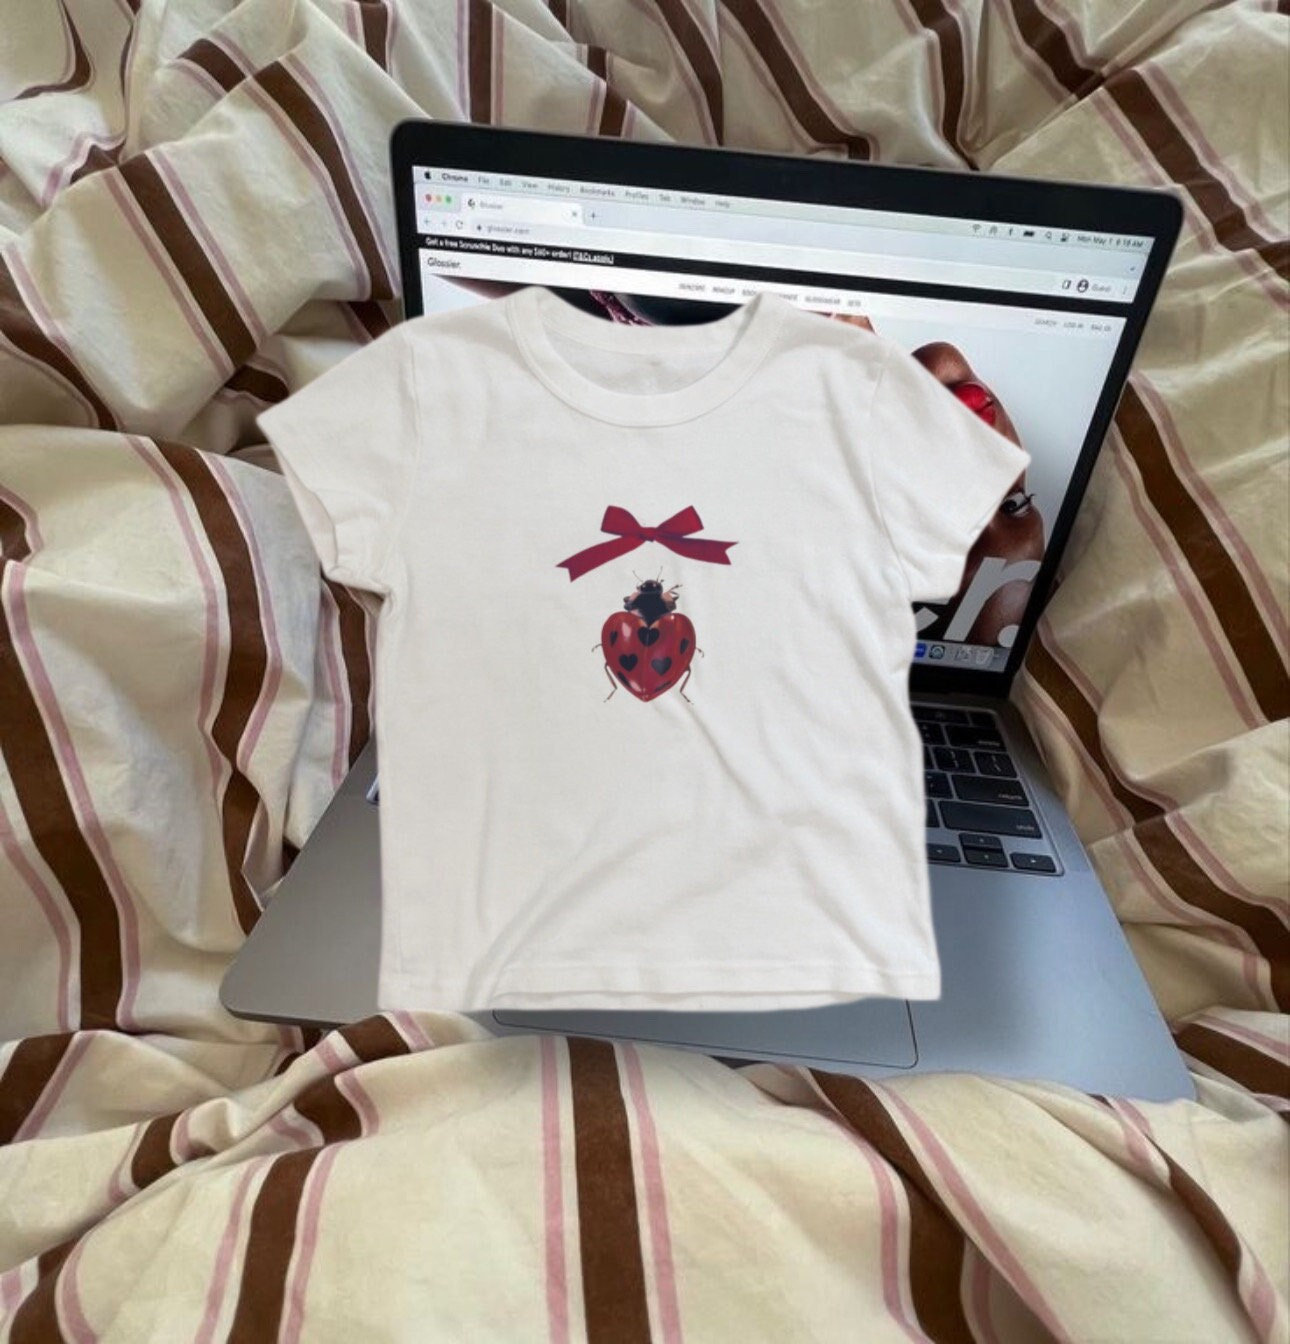 Vintage-inspired Lady Bird and Bow Baby Tee